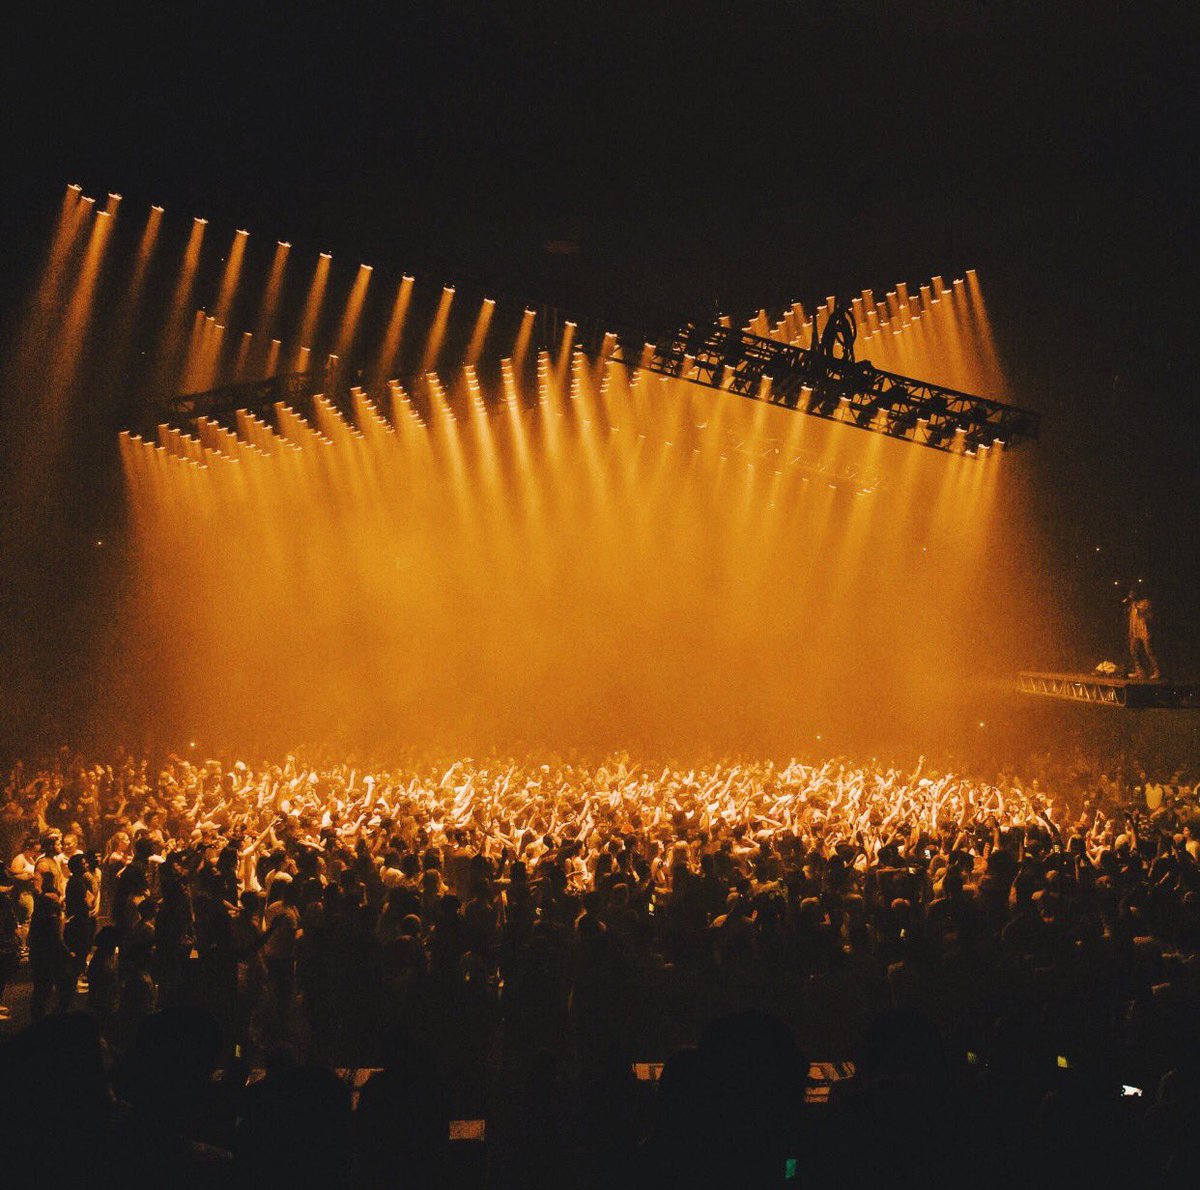 So ready for Saint Pablo tonight at MSG https://t.co/MR2HqIcTKn